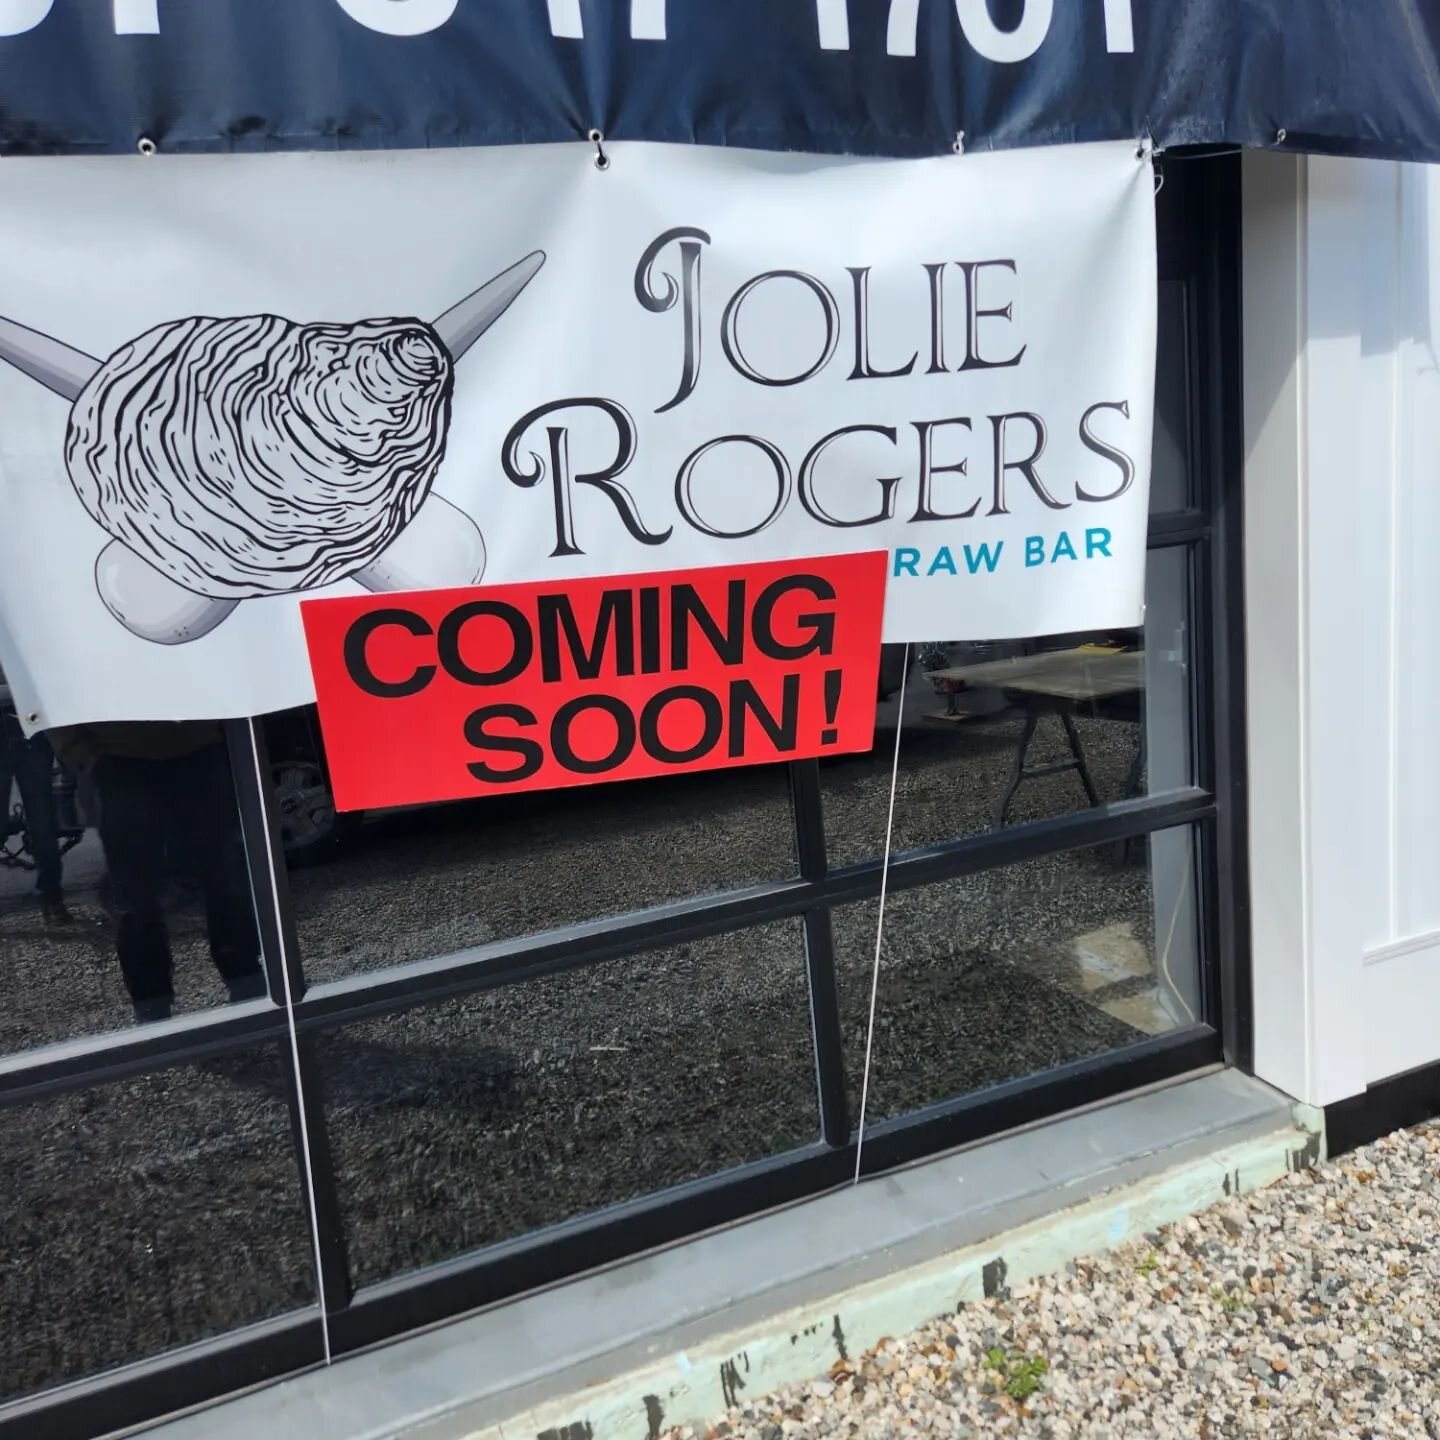 Jolie Rogers Raw Bar... Coming soon!
-
We are thrilled to announce that big things are on the horizon this season as we embark on a new chapter in the beautiful town of Wiscasset, Maine.